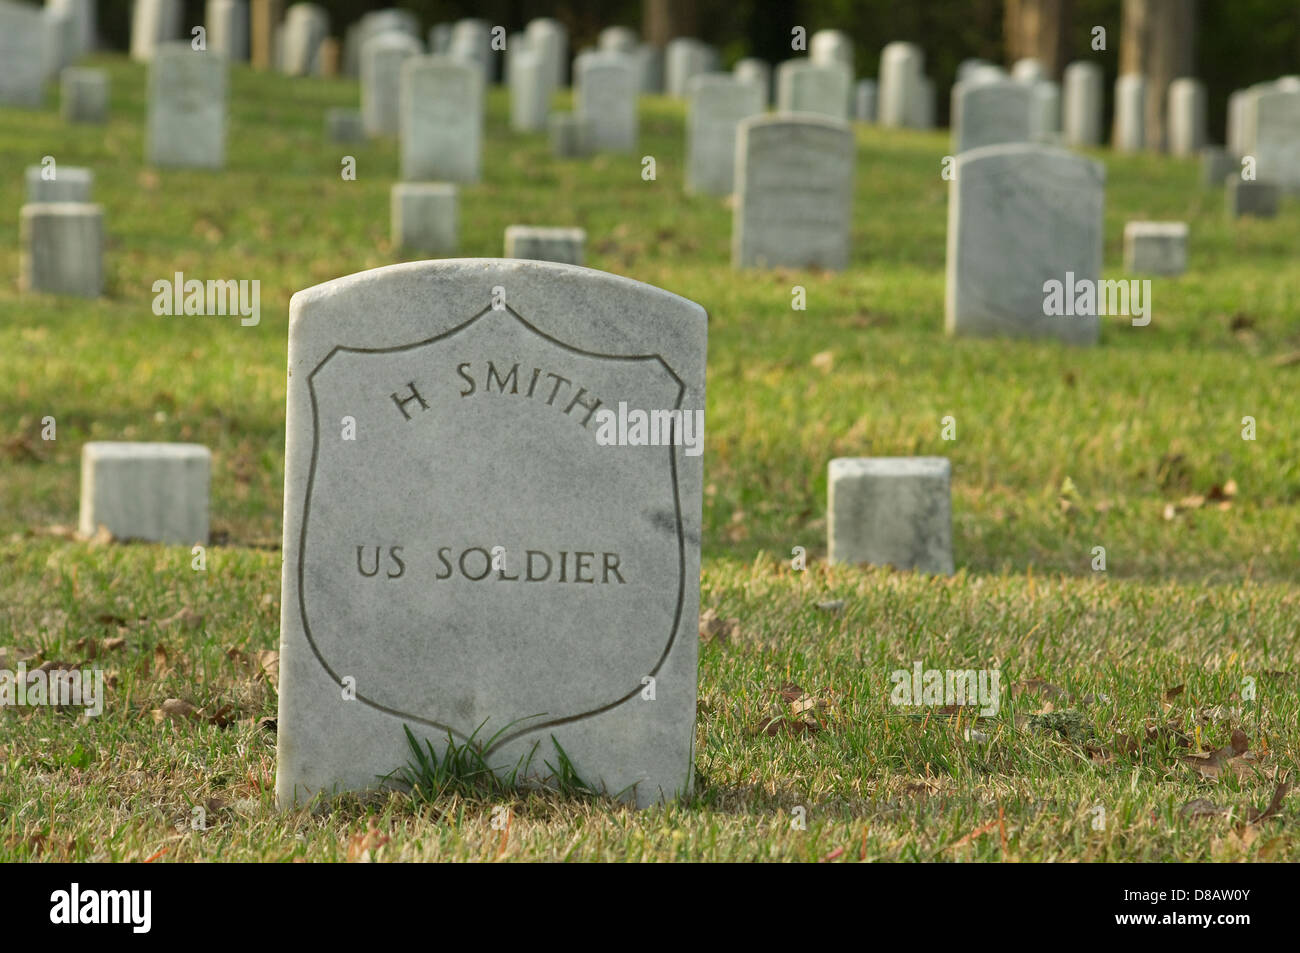 US soldier's headstone amid other Union graves, National Cemetery, Shiloh National Military Park, Tennessee. Digital photograph Stock Photo